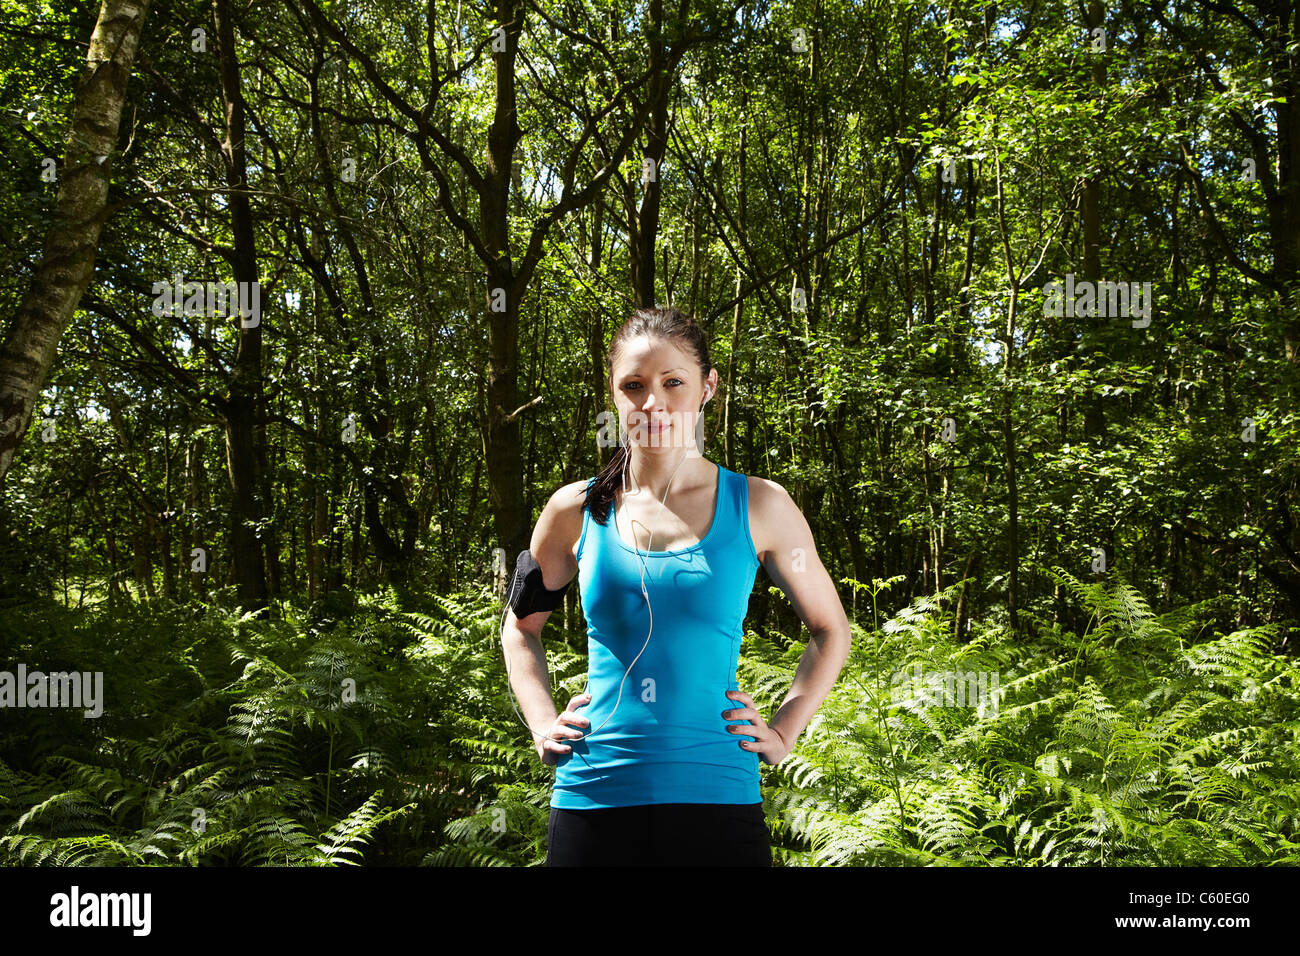 Runner standing in forest Banque D'Images